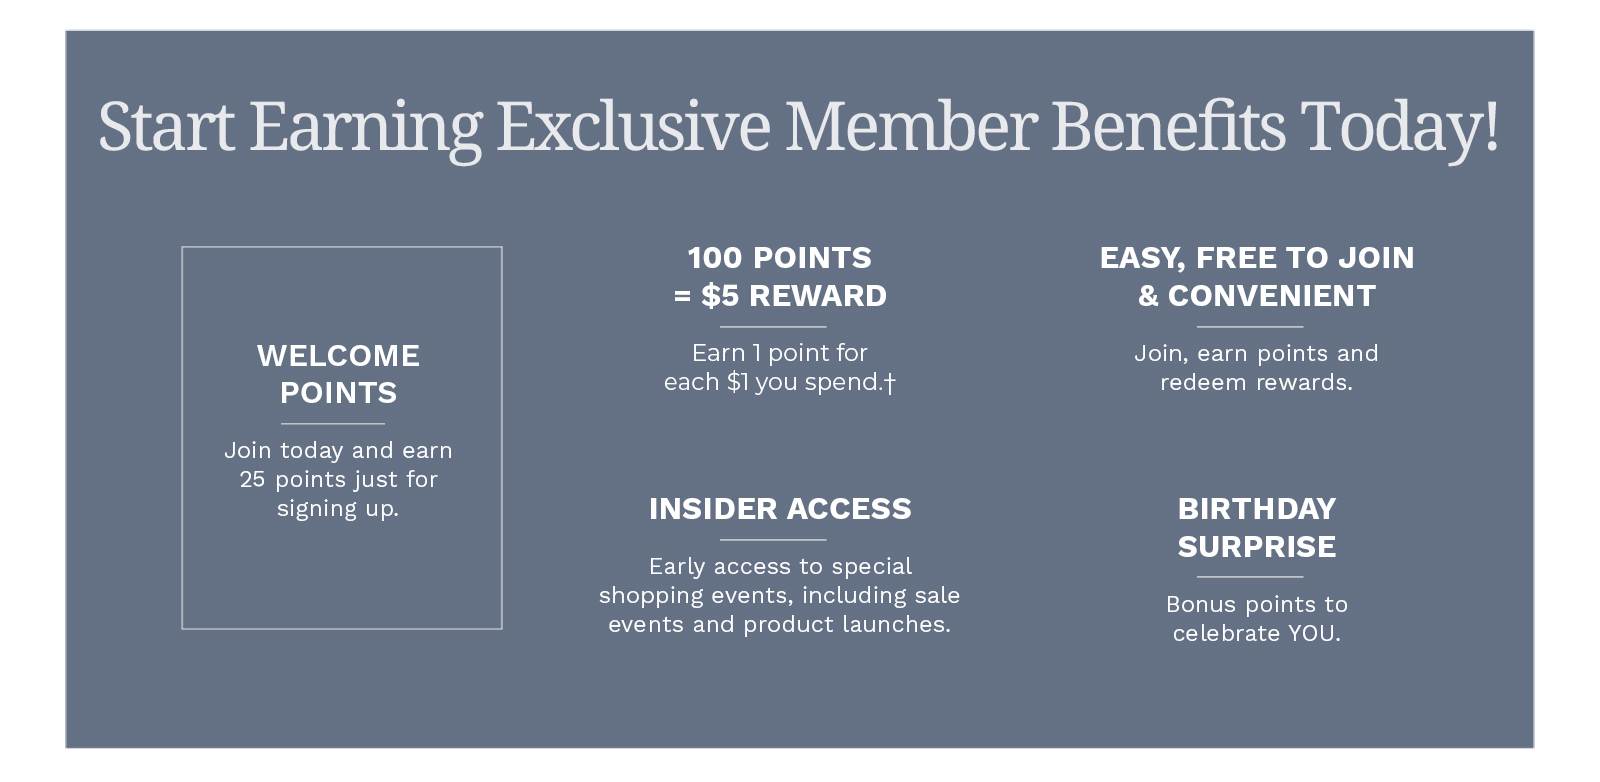 Start earning Exclusive Member Benefits today! Welcome Points: Join today and earn 25 points just for signing up. 100 Points = $5 Reward: Earn 1 point for each $1 you spend.† Easy, Free to Join & Convenient: Join, earn points and redeem rewards. Insider Access: Early access to special shopping events, including sale events and product launches. Birthday Surprise: Bonus points to celebrate YOU. Thank you for being a part of the Draper's & Damon's family. We're looking forward to having you join the club! Join for Free